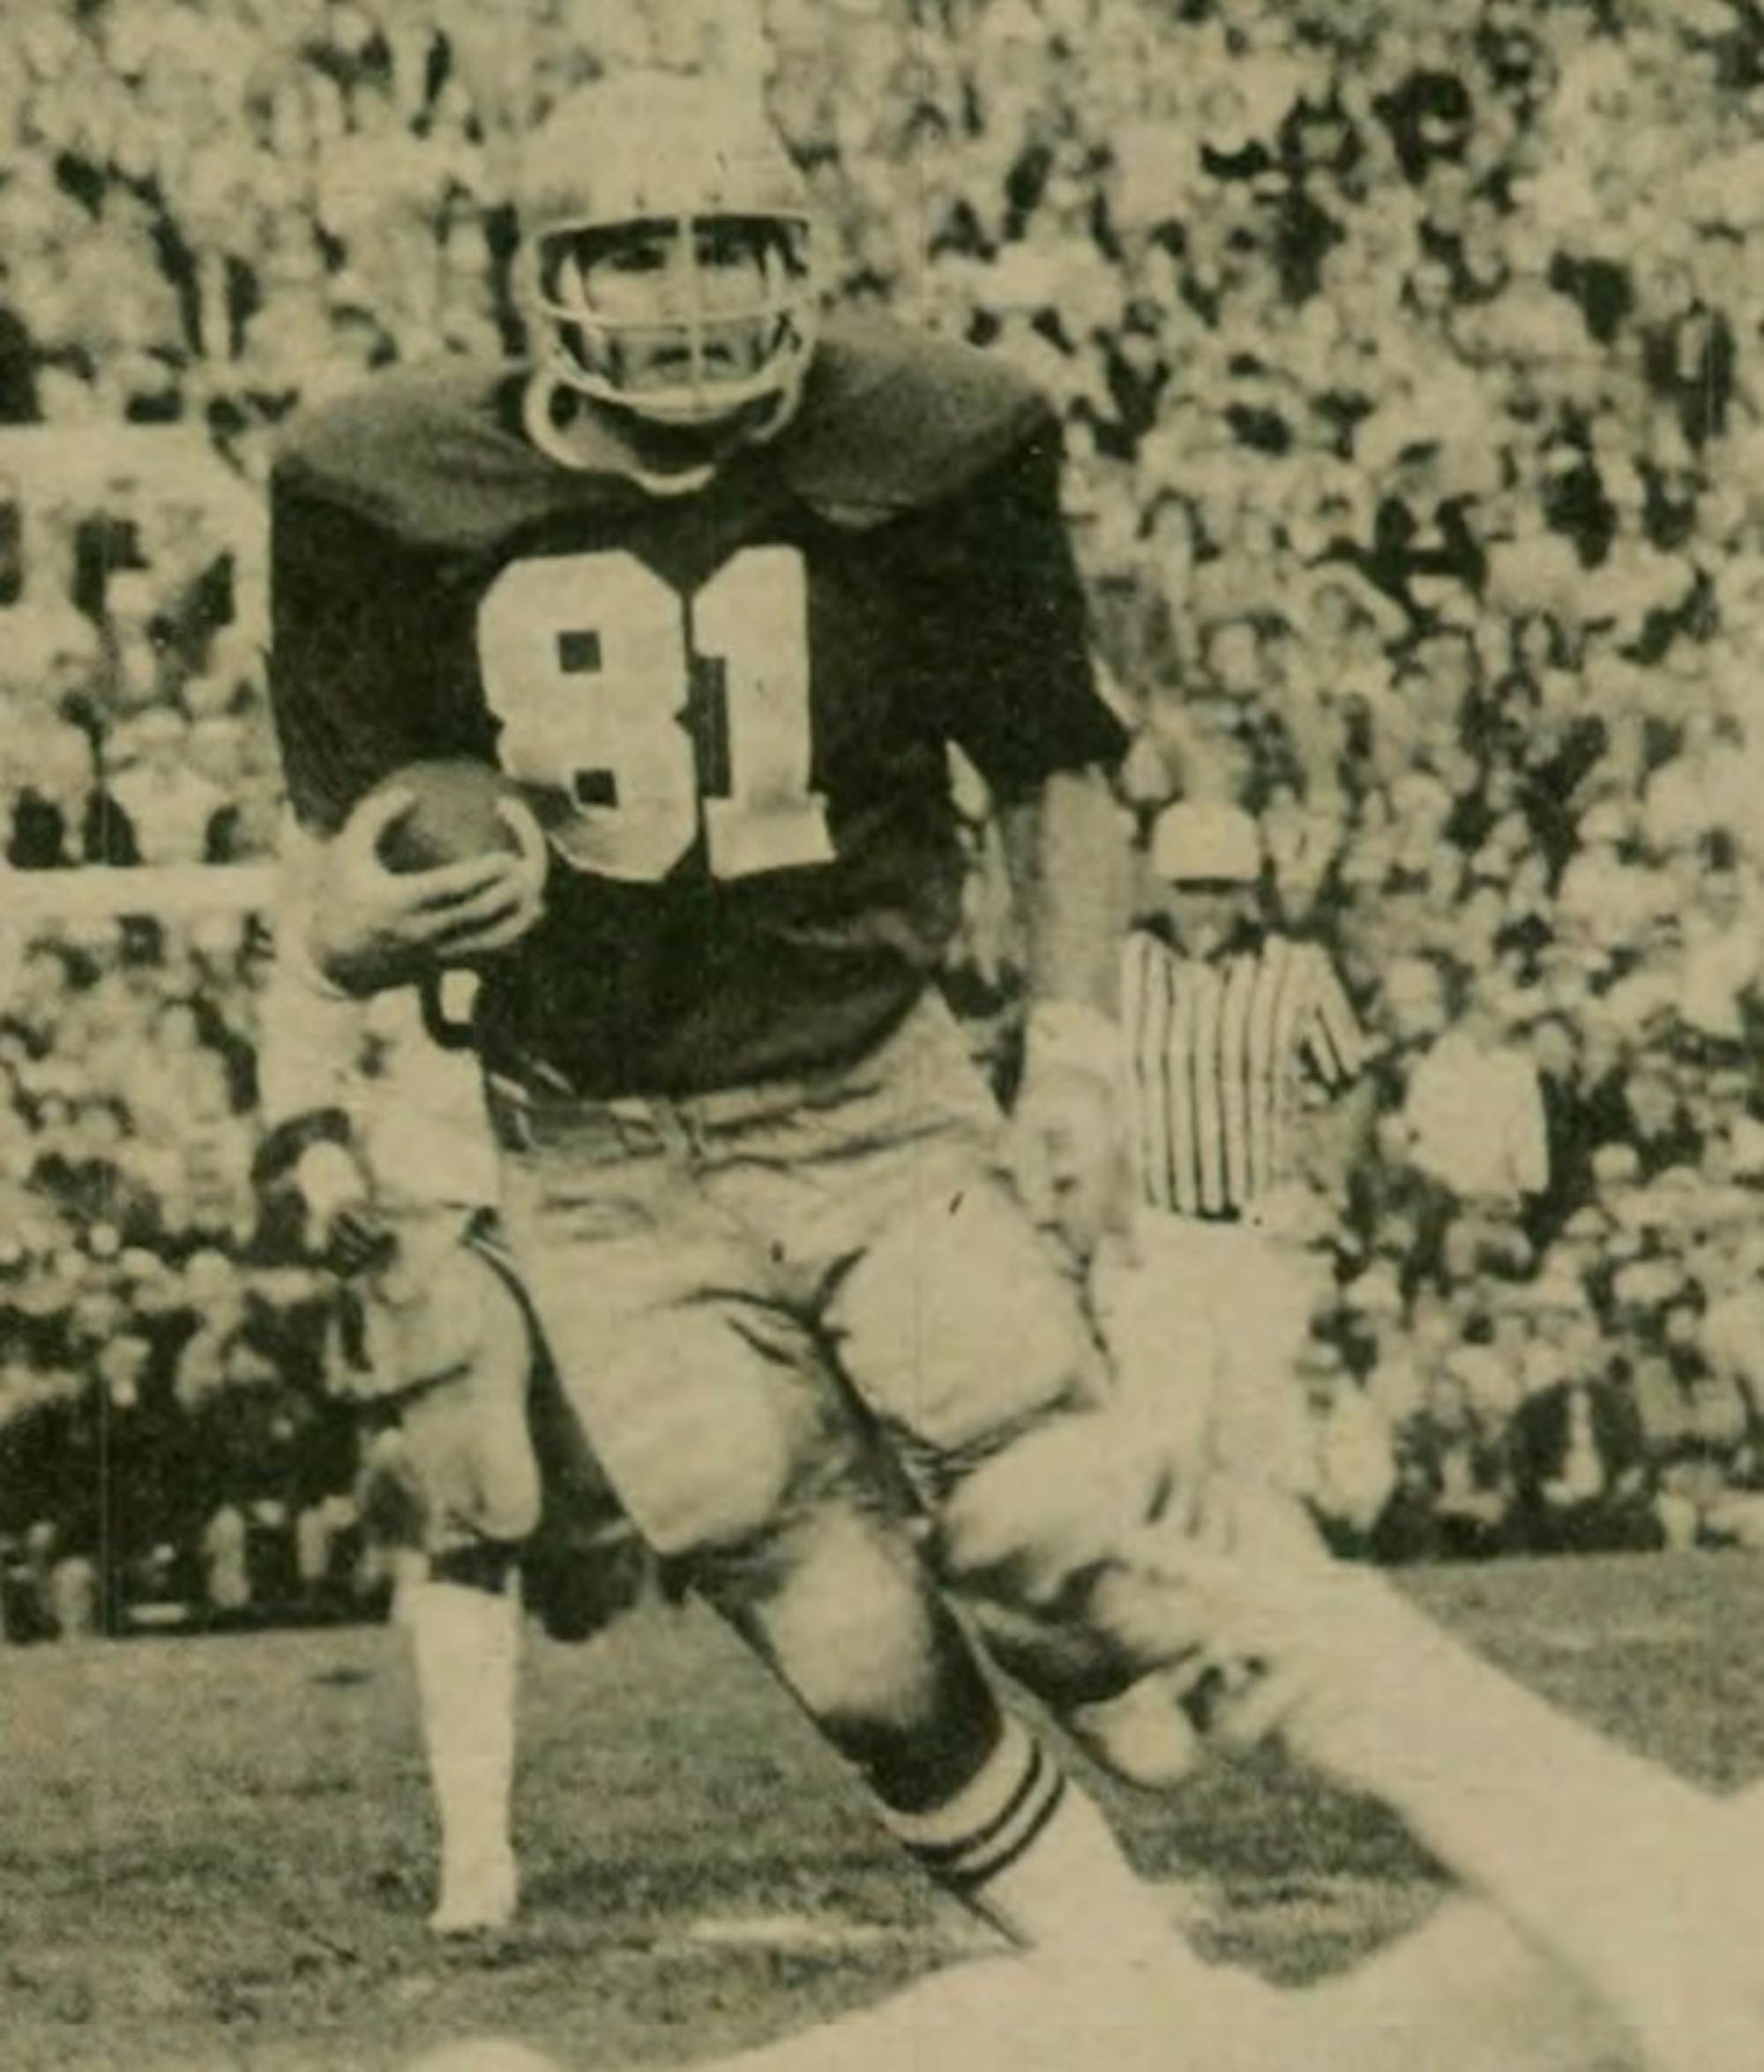 Irish tight end Ken MacAfee carries the ball during the 1976 season. MacAfee played for Notre Dame from 1974 to 1977. He was a three-time All-American and the 1977 Walter Camp Player of the Year.